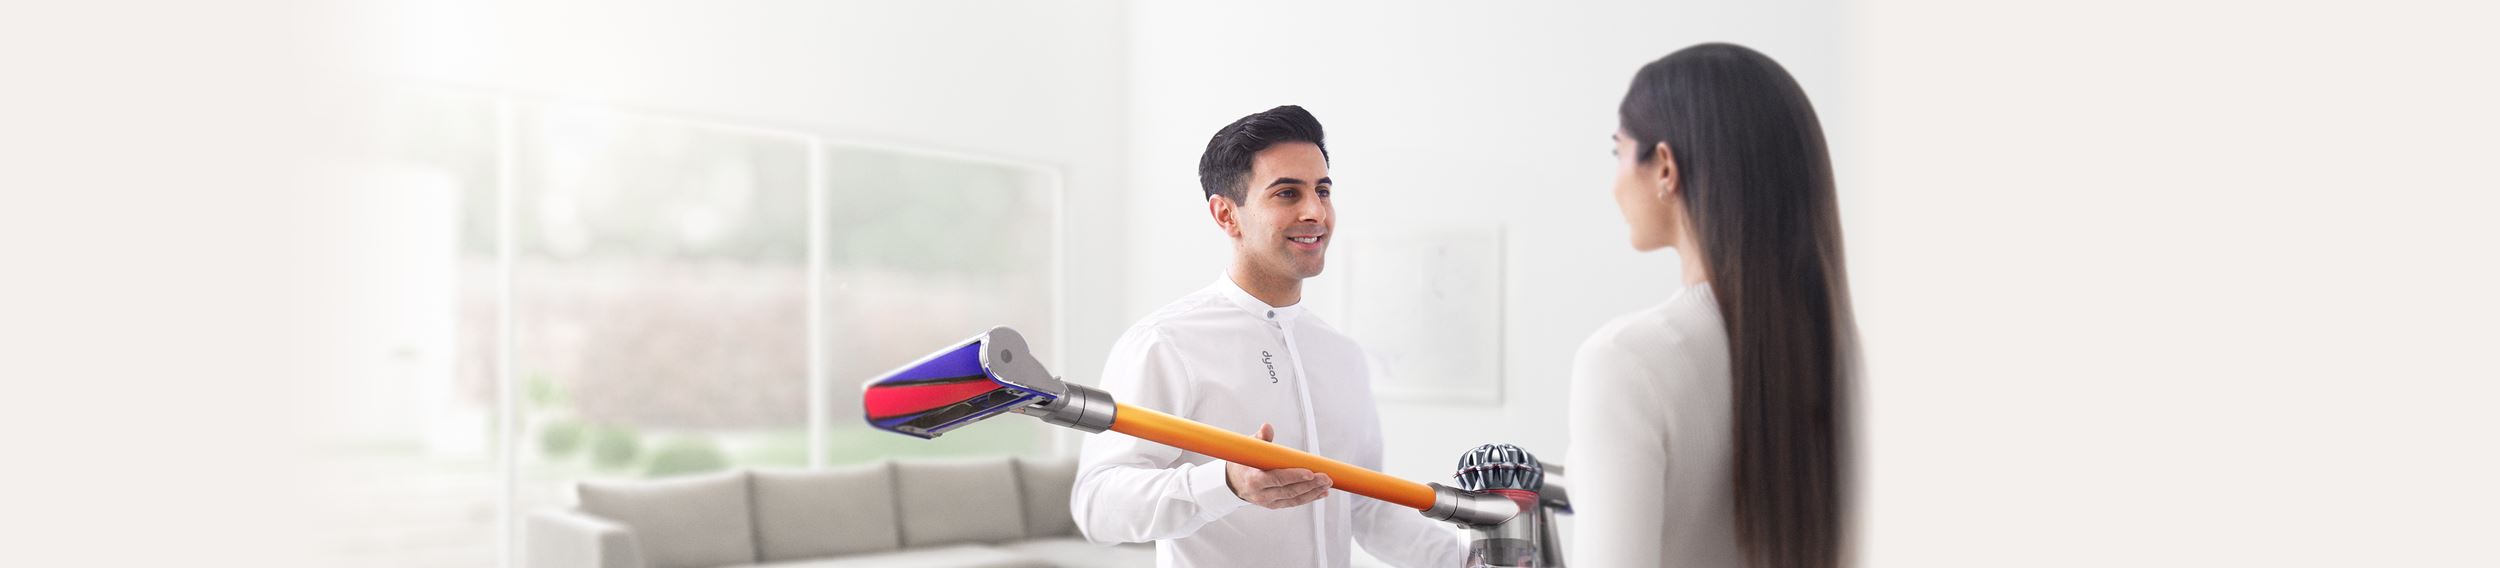 Image of Dyson technology support demo